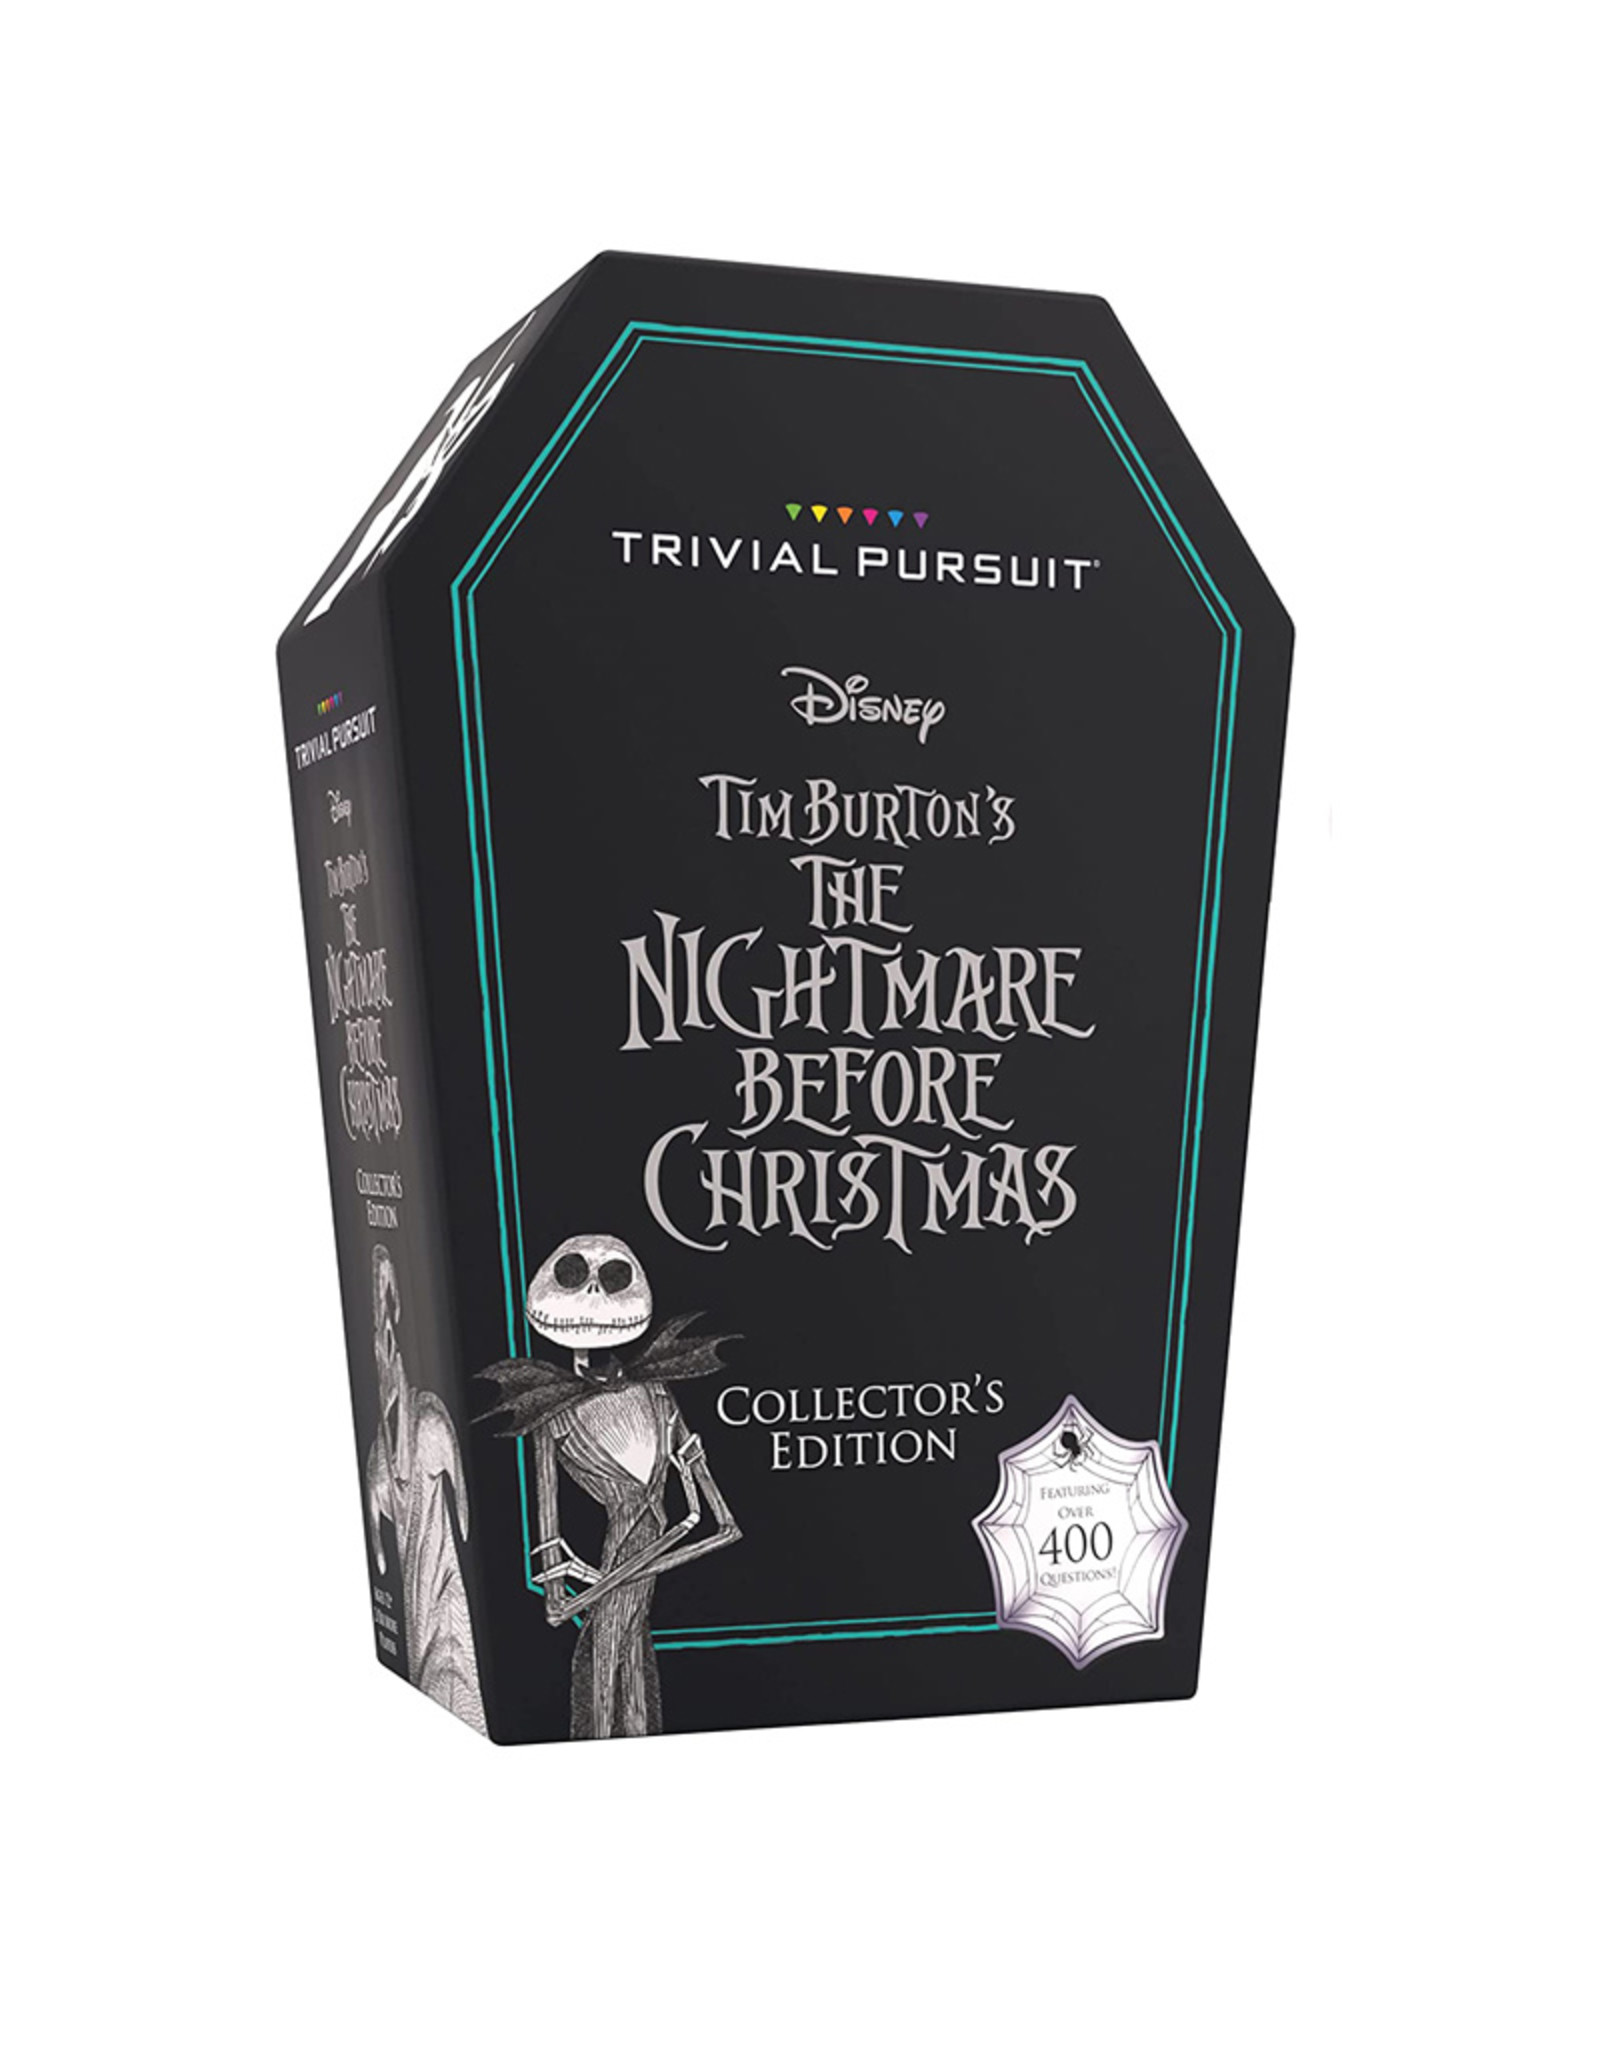 Usaopoly Trivial Pursuit: Nightmare Before Christmas